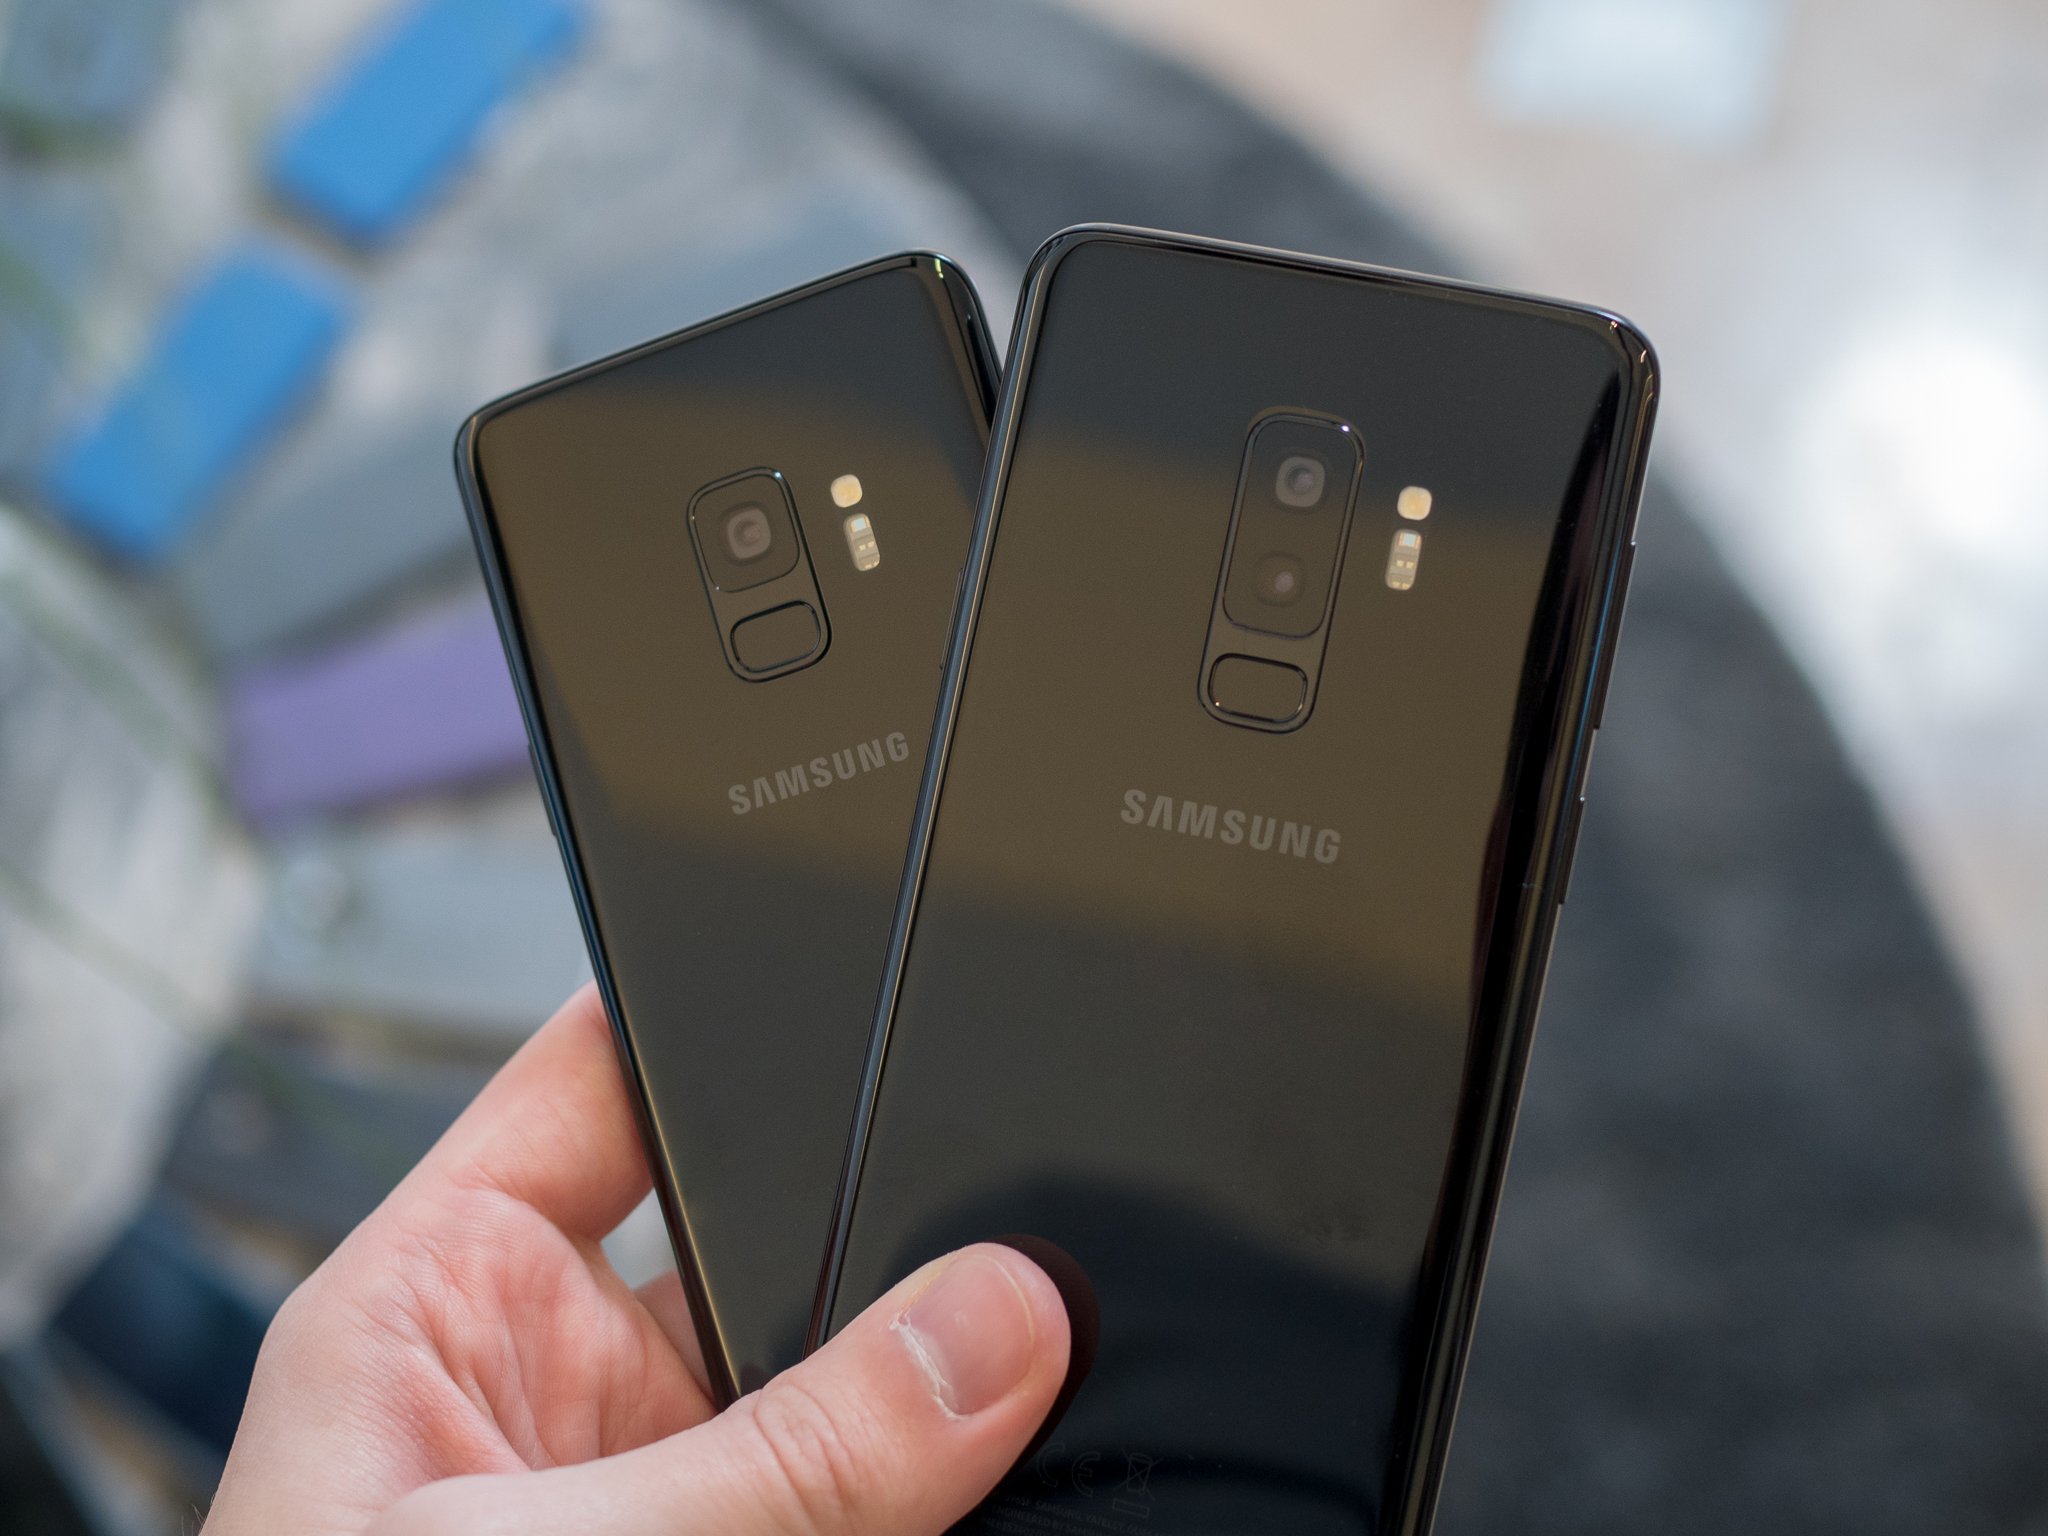 The Samsung Galaxy S9 and Galaxy S9 Plus: What You Need to Know